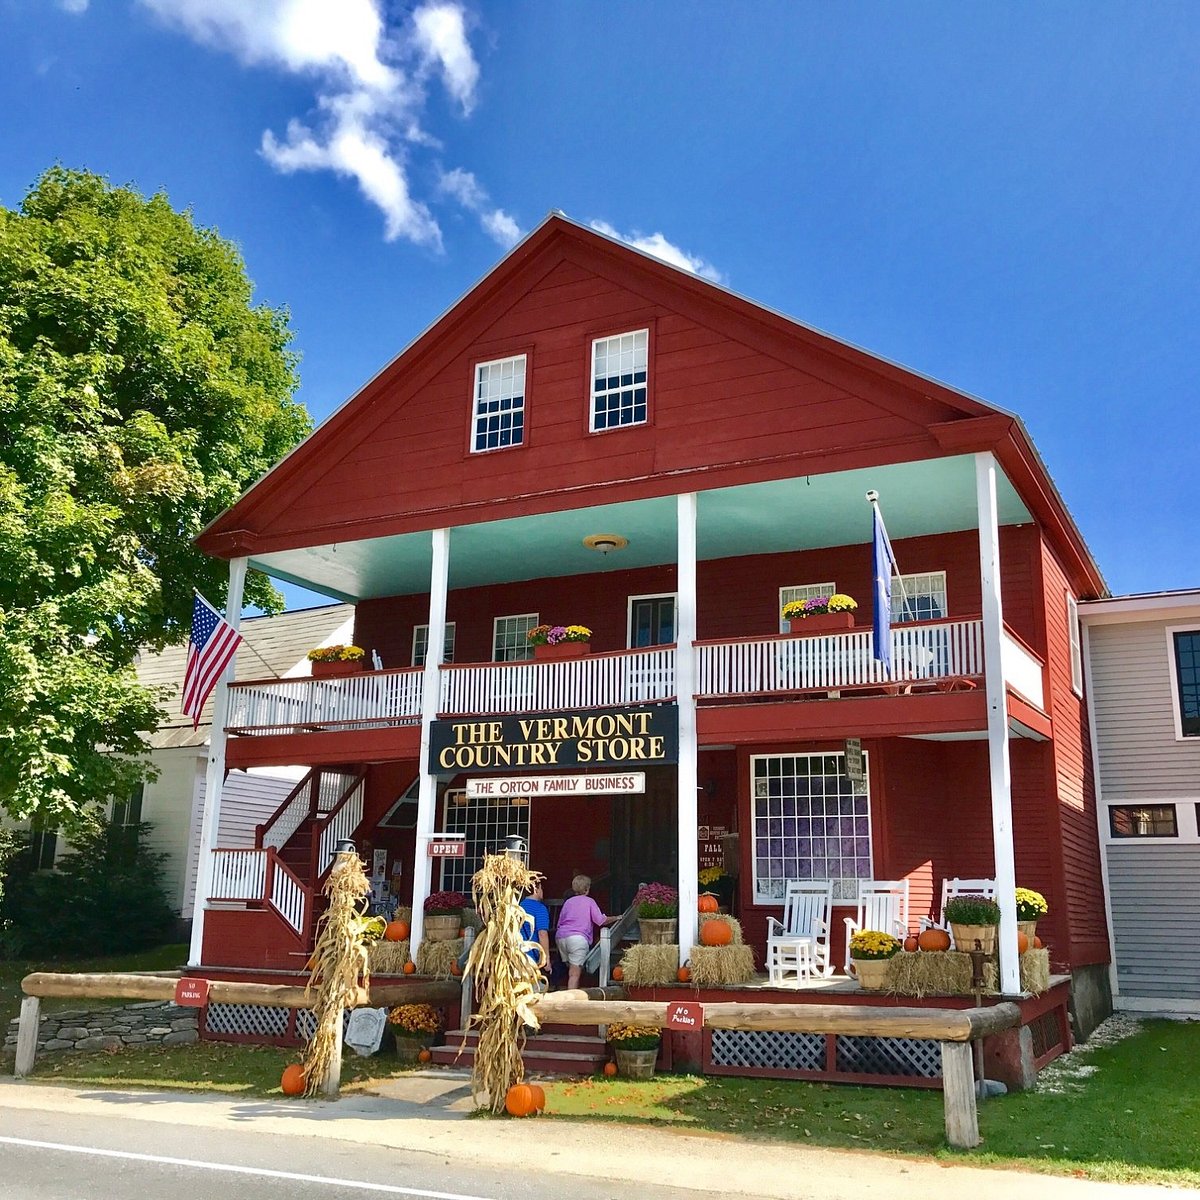 The Best Home Decor Finds from The Vermont Country Store Catalog